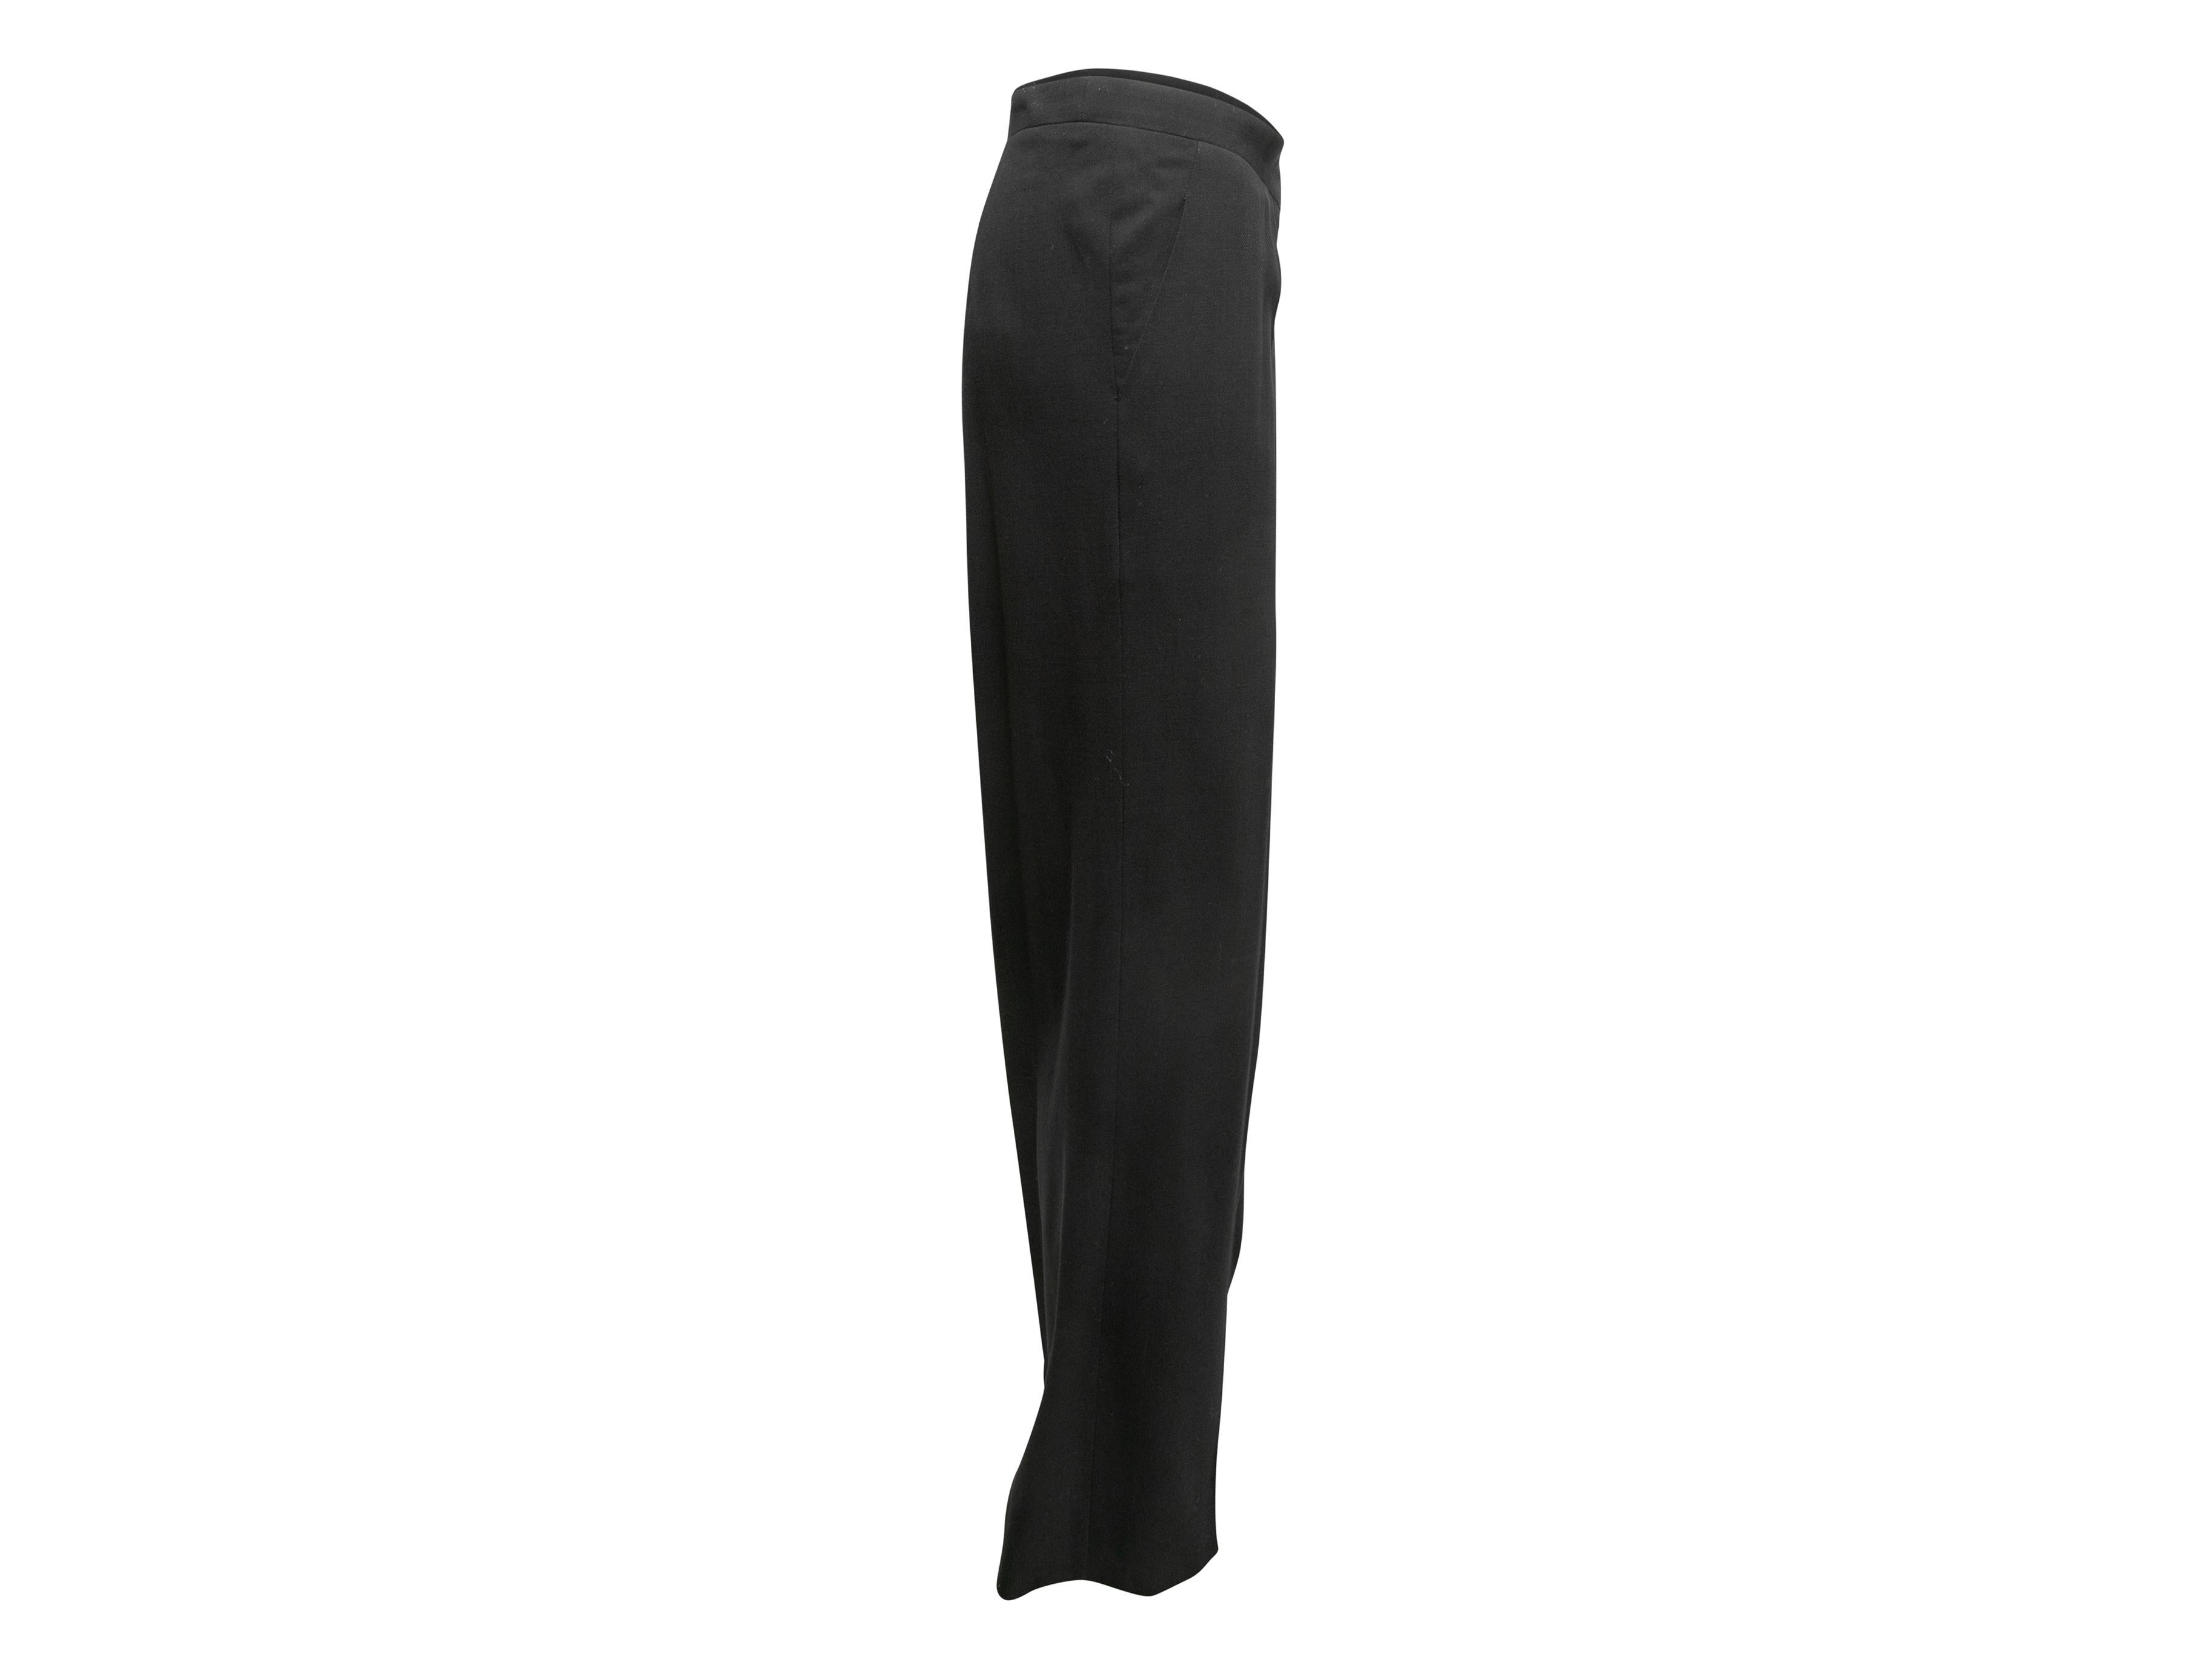 Black wool trousers by Chanel. From the Fall/Winter 2008 Collection. Dual hip pockets. Front zip closure. 40